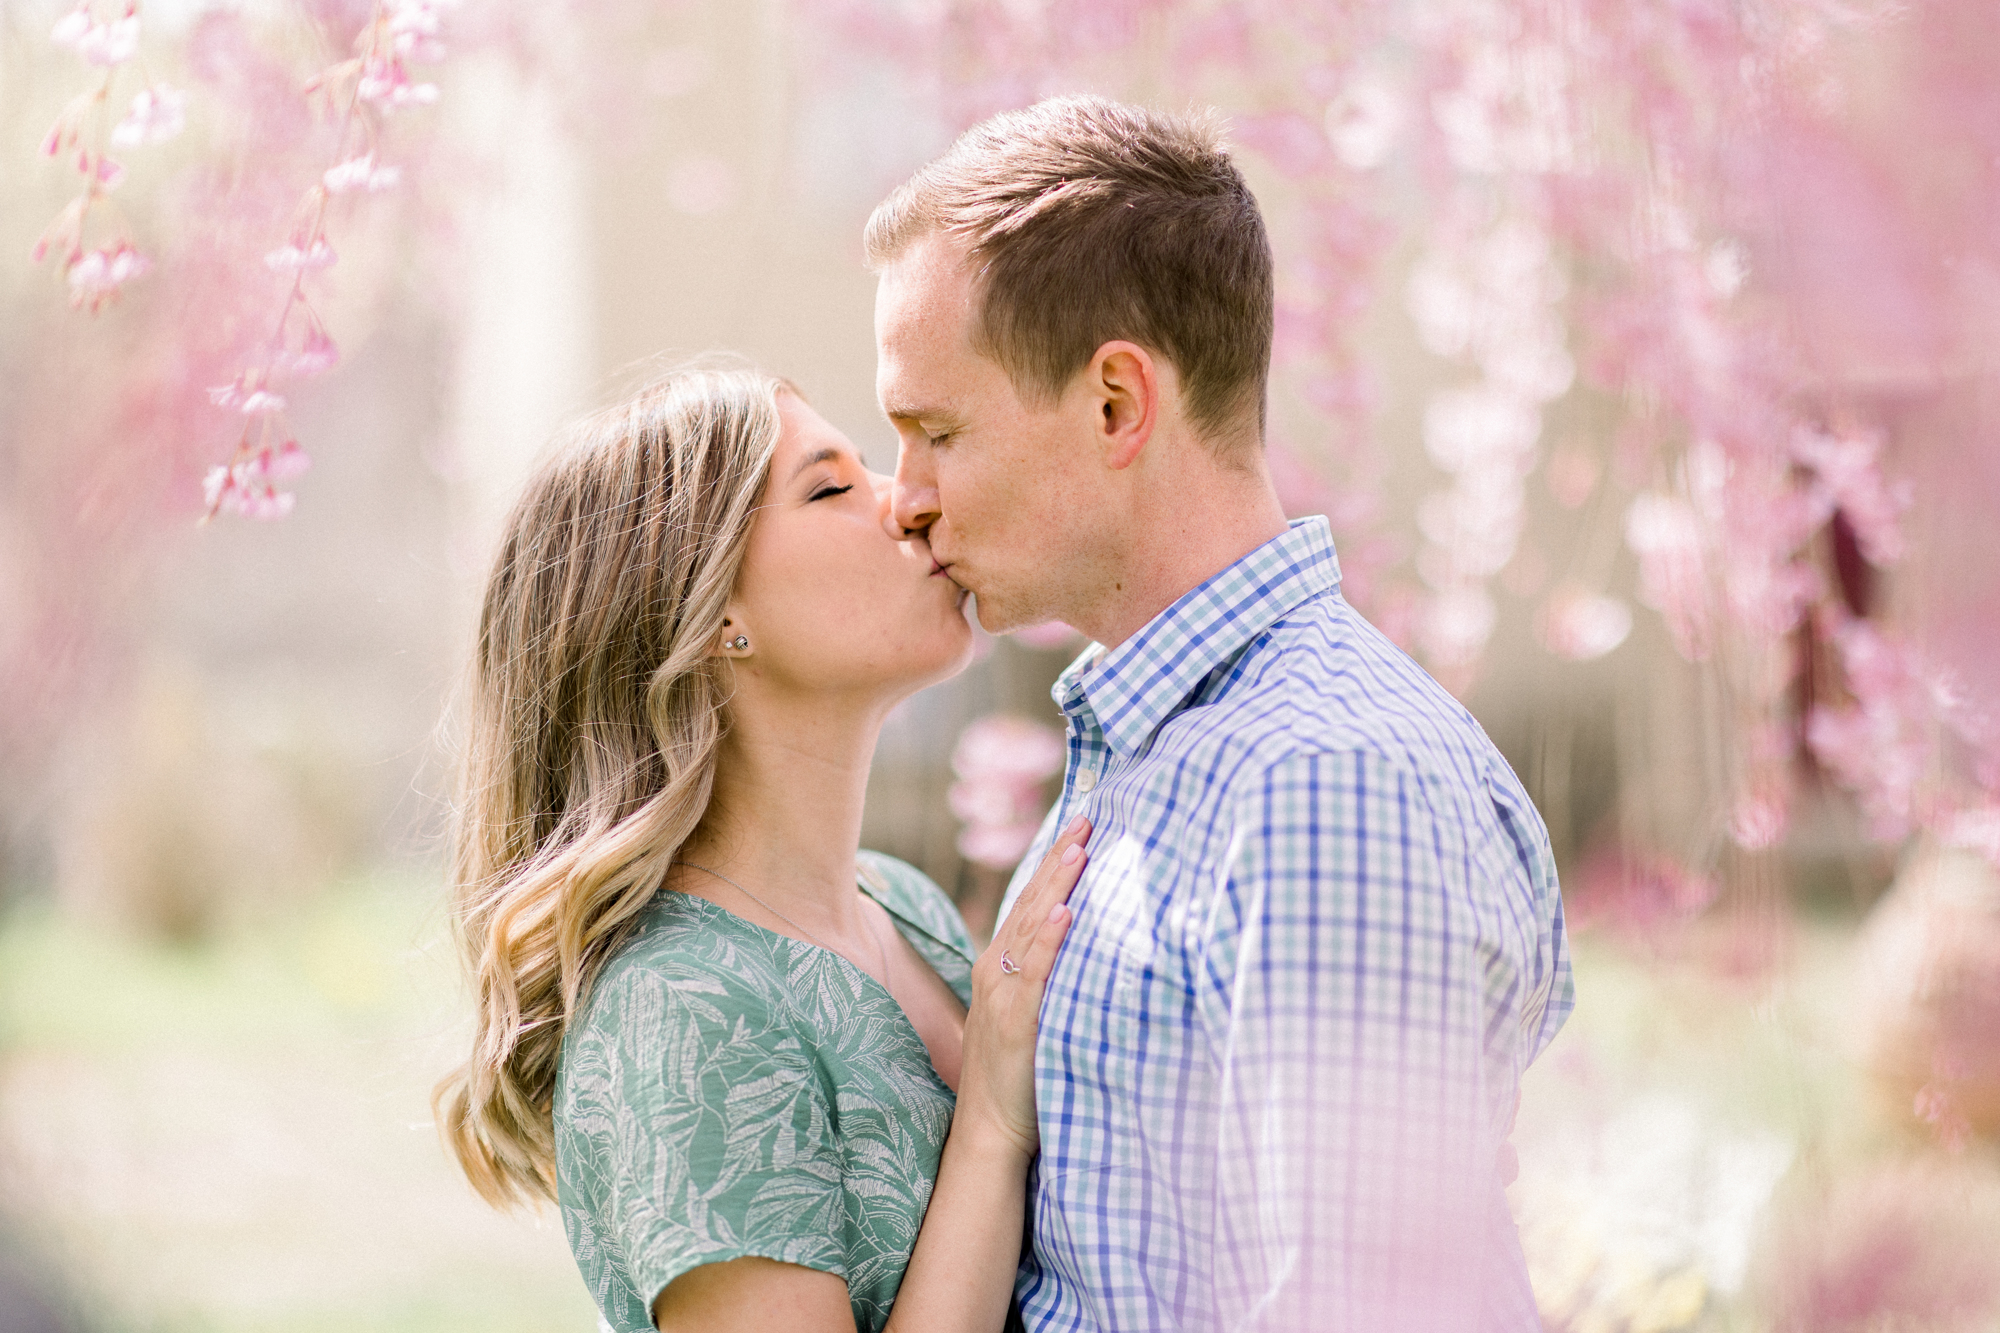 Artistic NYC Engagement Photography with Spring Blossoms